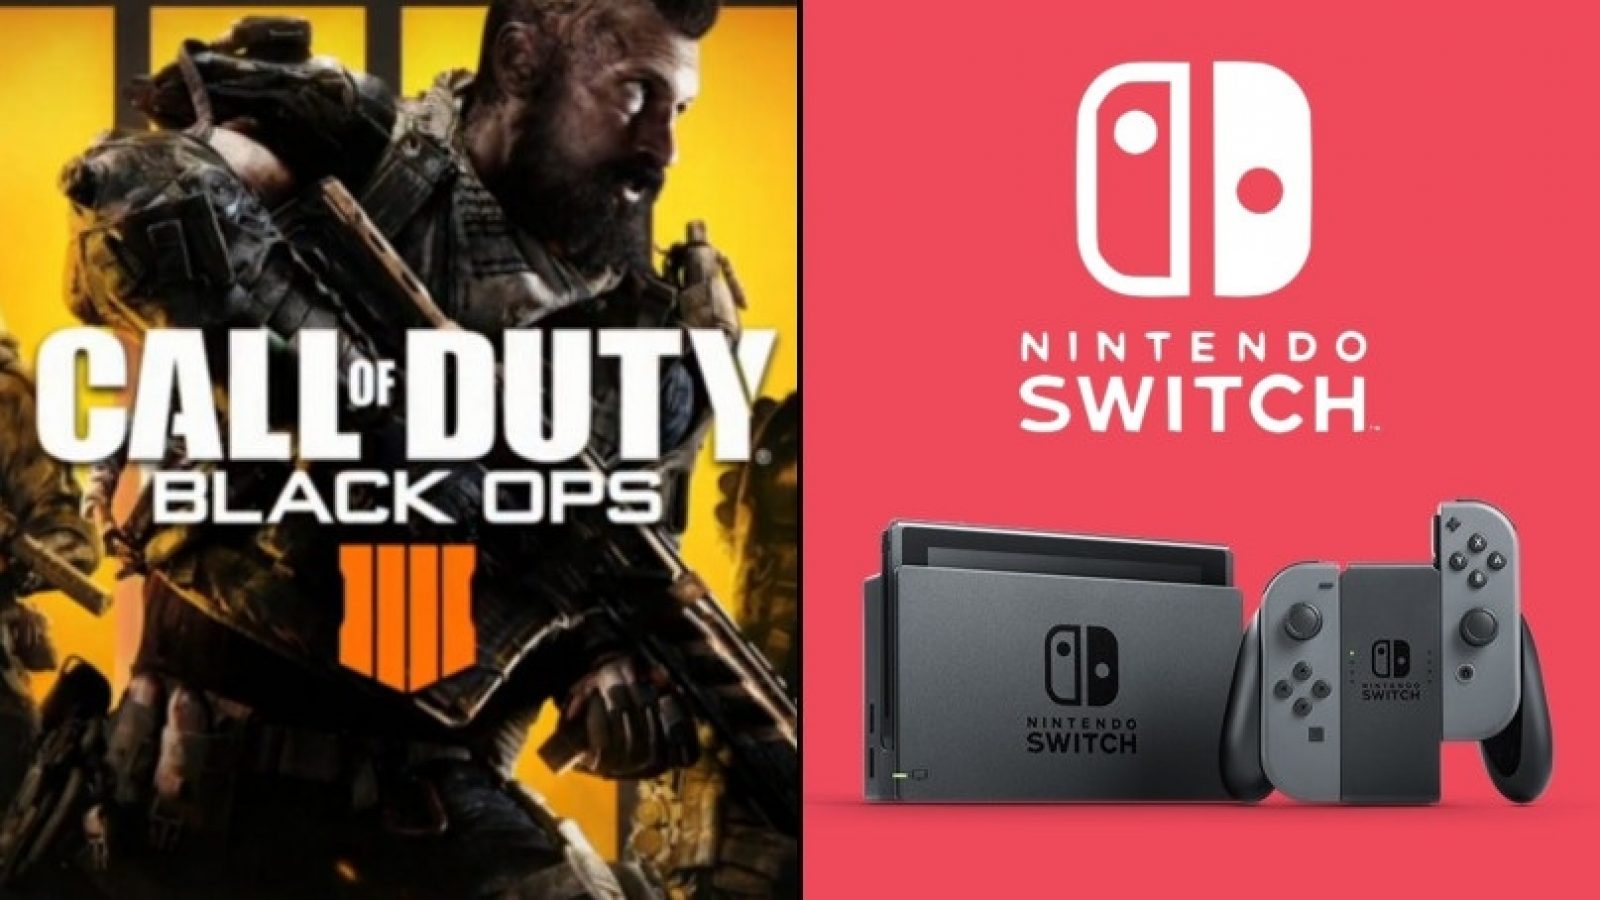 Call of Duty Mobile on Nintendo Switch?